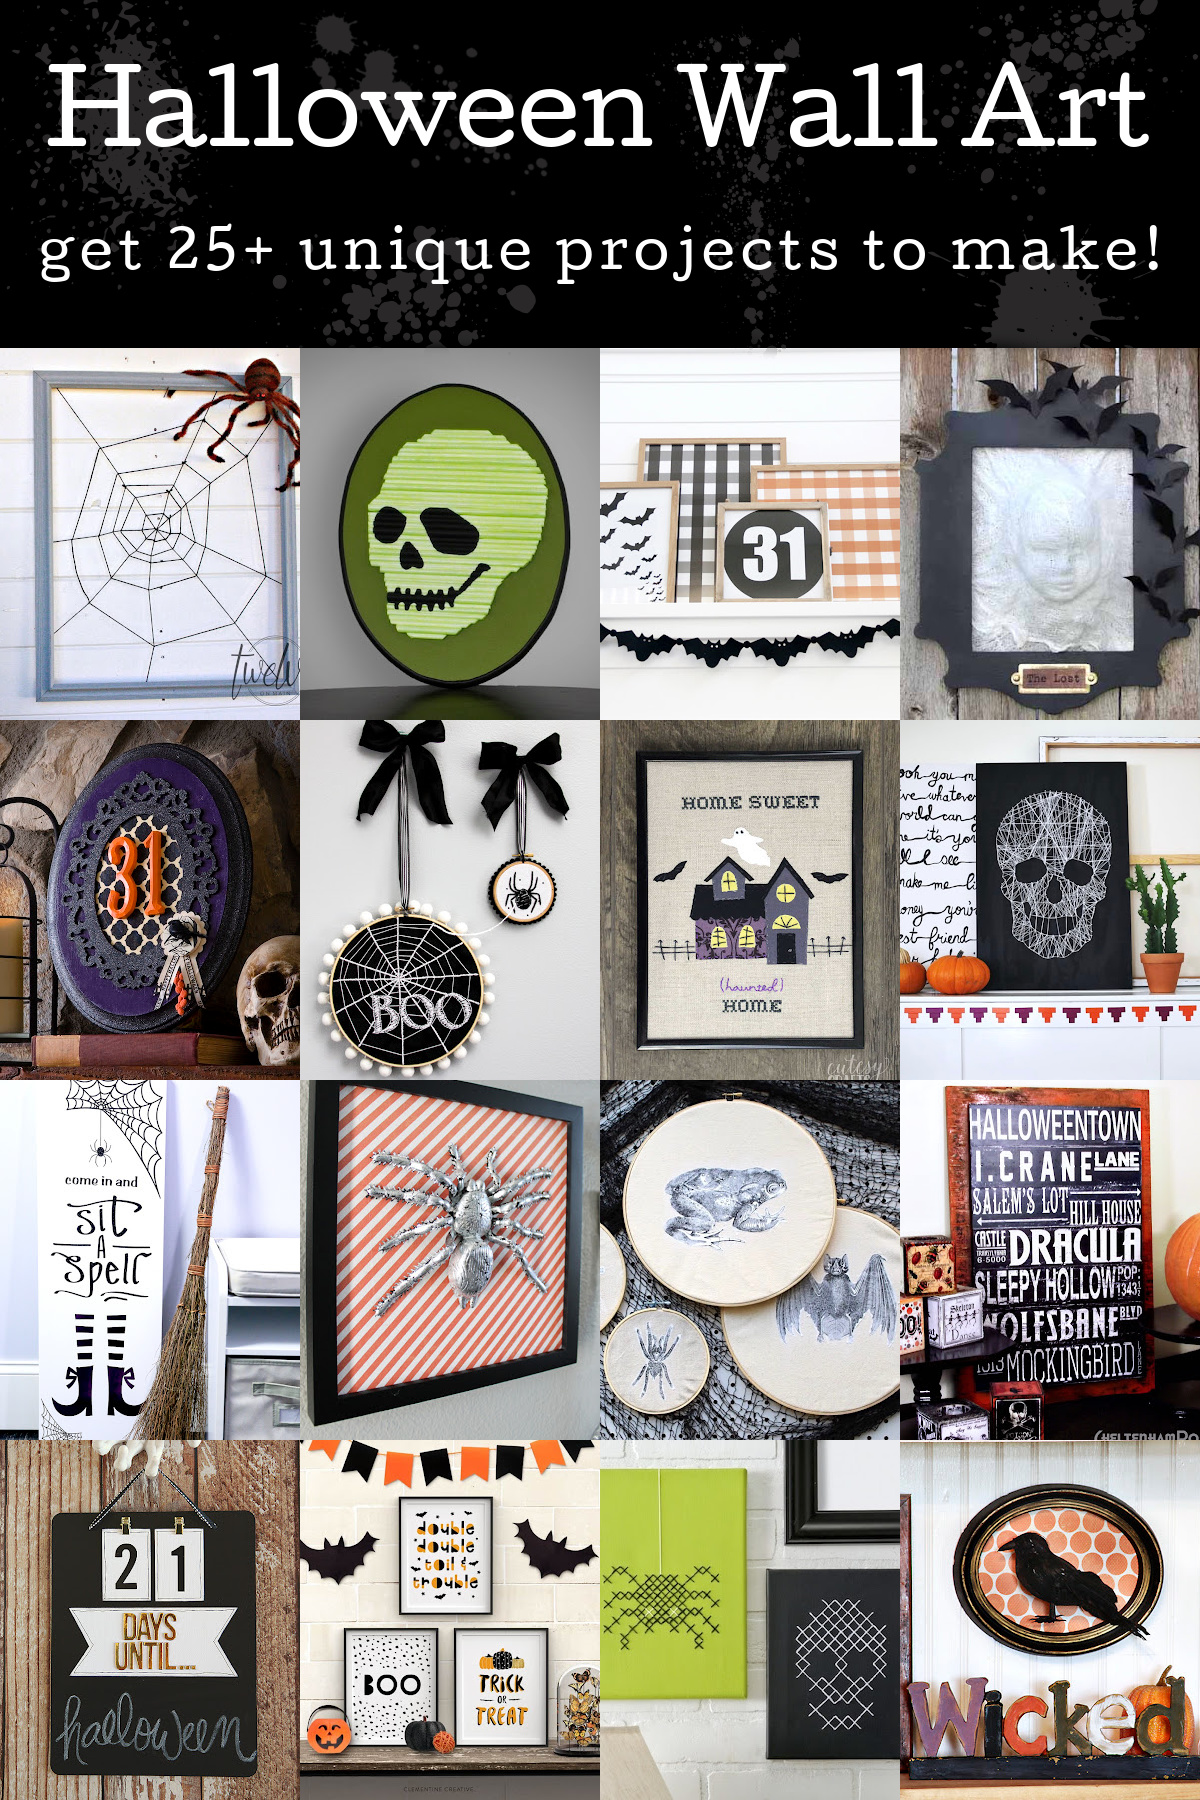 Halloween Wall Art for Decorating